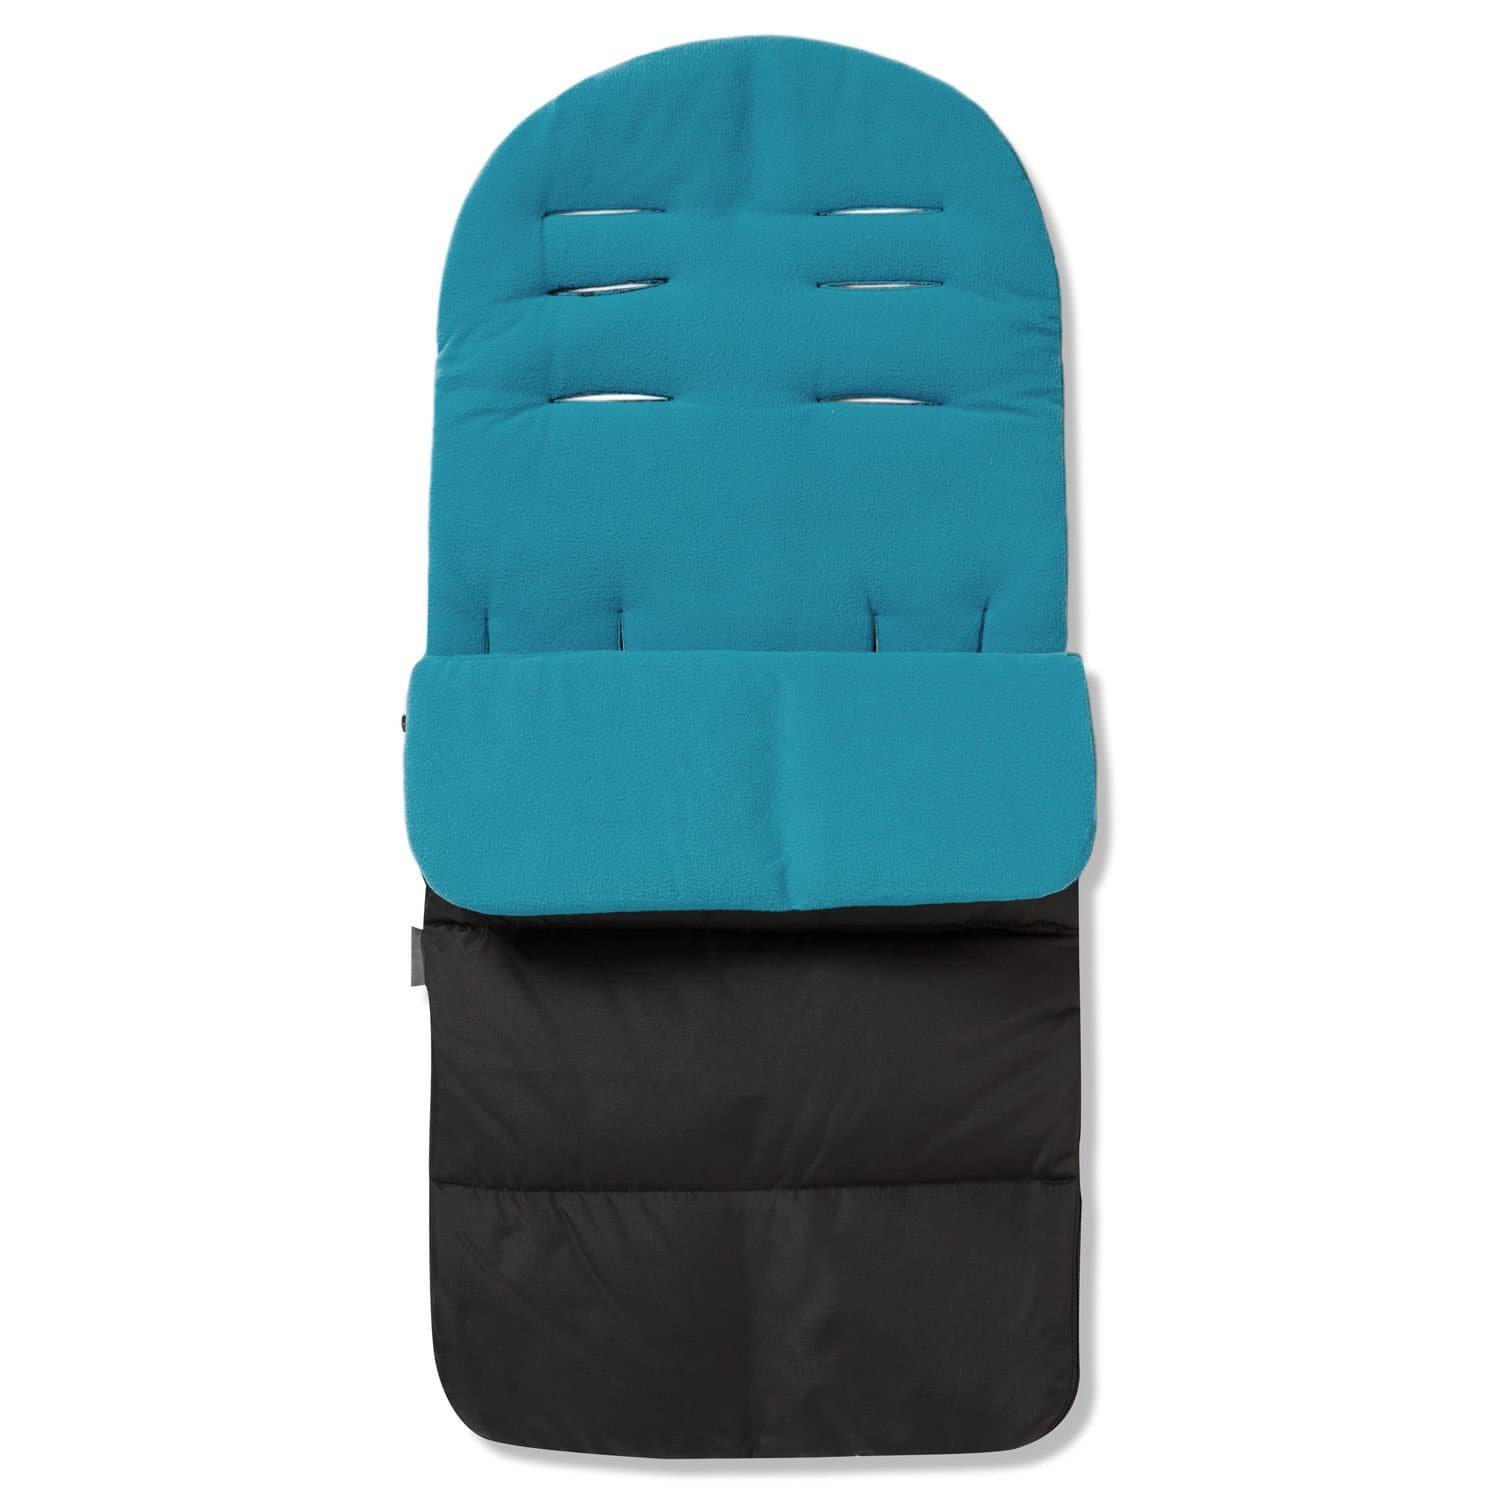 Premium Footmuff / Cosy Toes Compatible with Norton - Ocean Blue / Fits All Models | For Your Little One